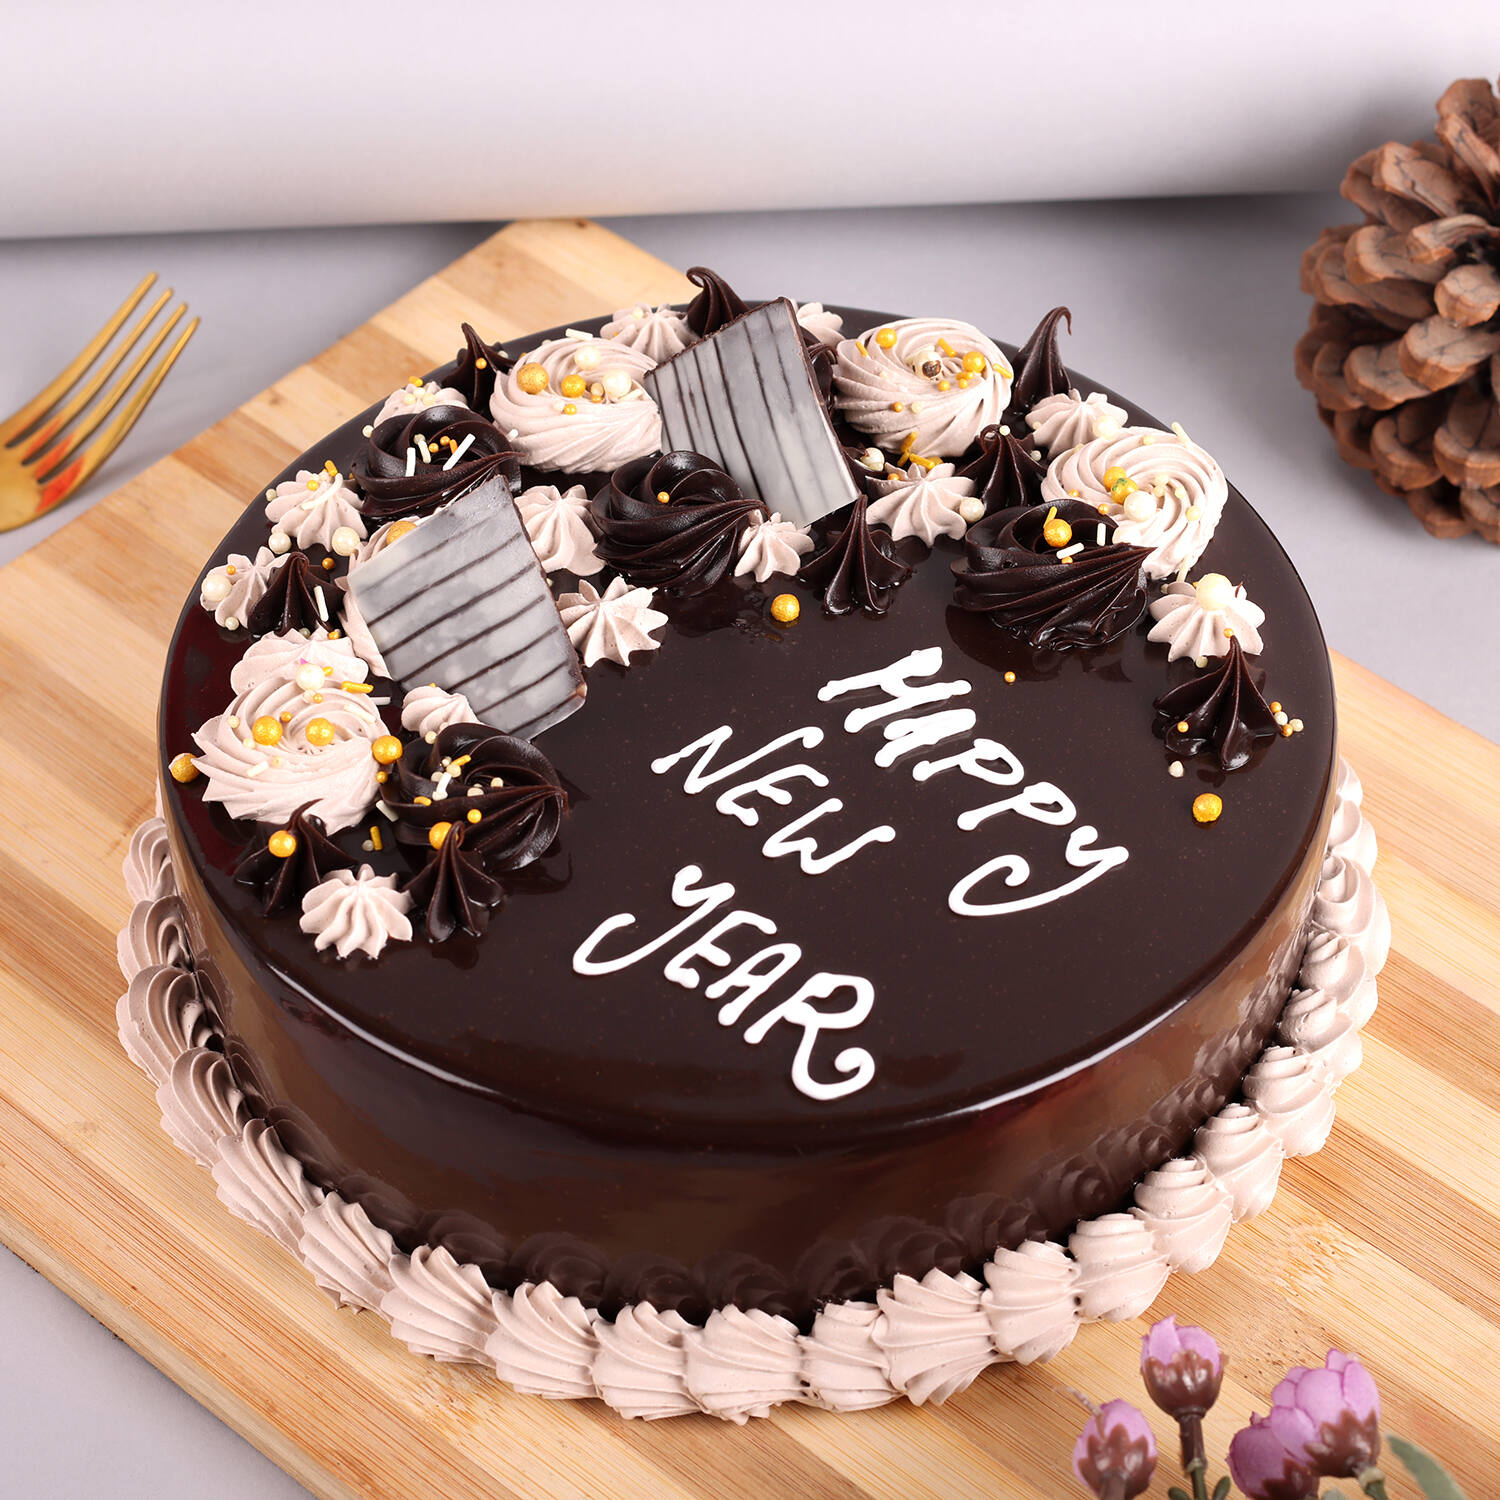 Twin Love N Joy - Buy, Send & Order Online Delivery In India - Cake2homes